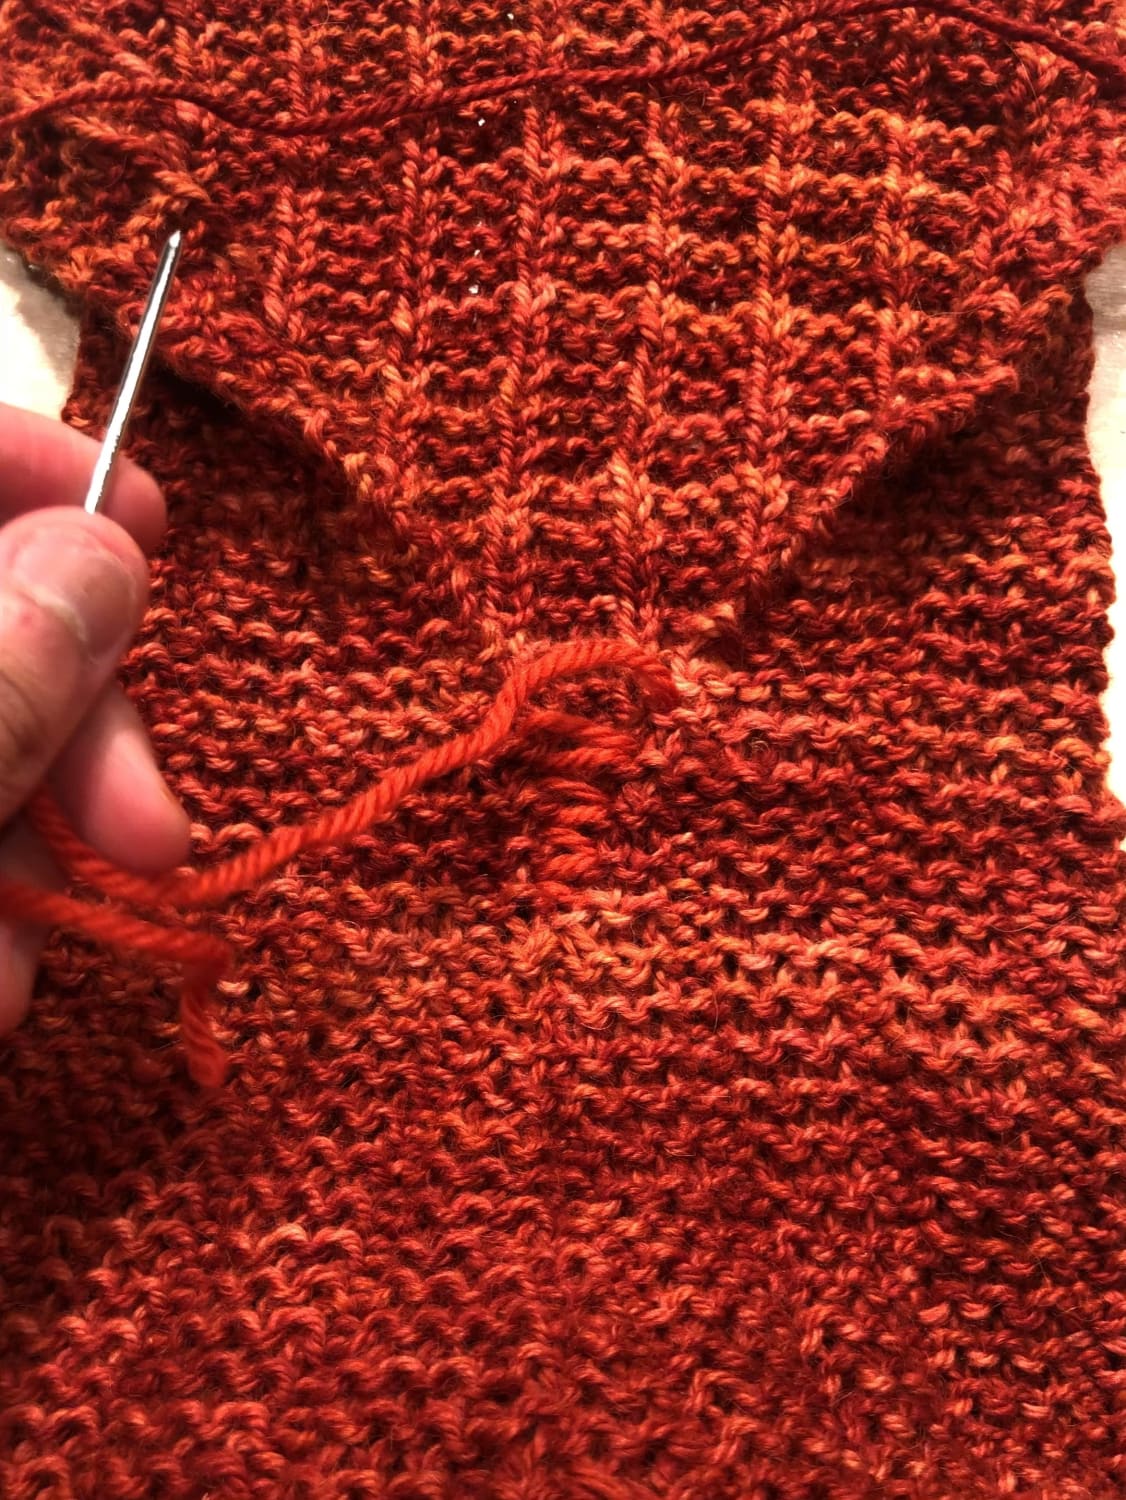 Is it just me of does anyone else find seaming oddly satisfying and therapeutic?